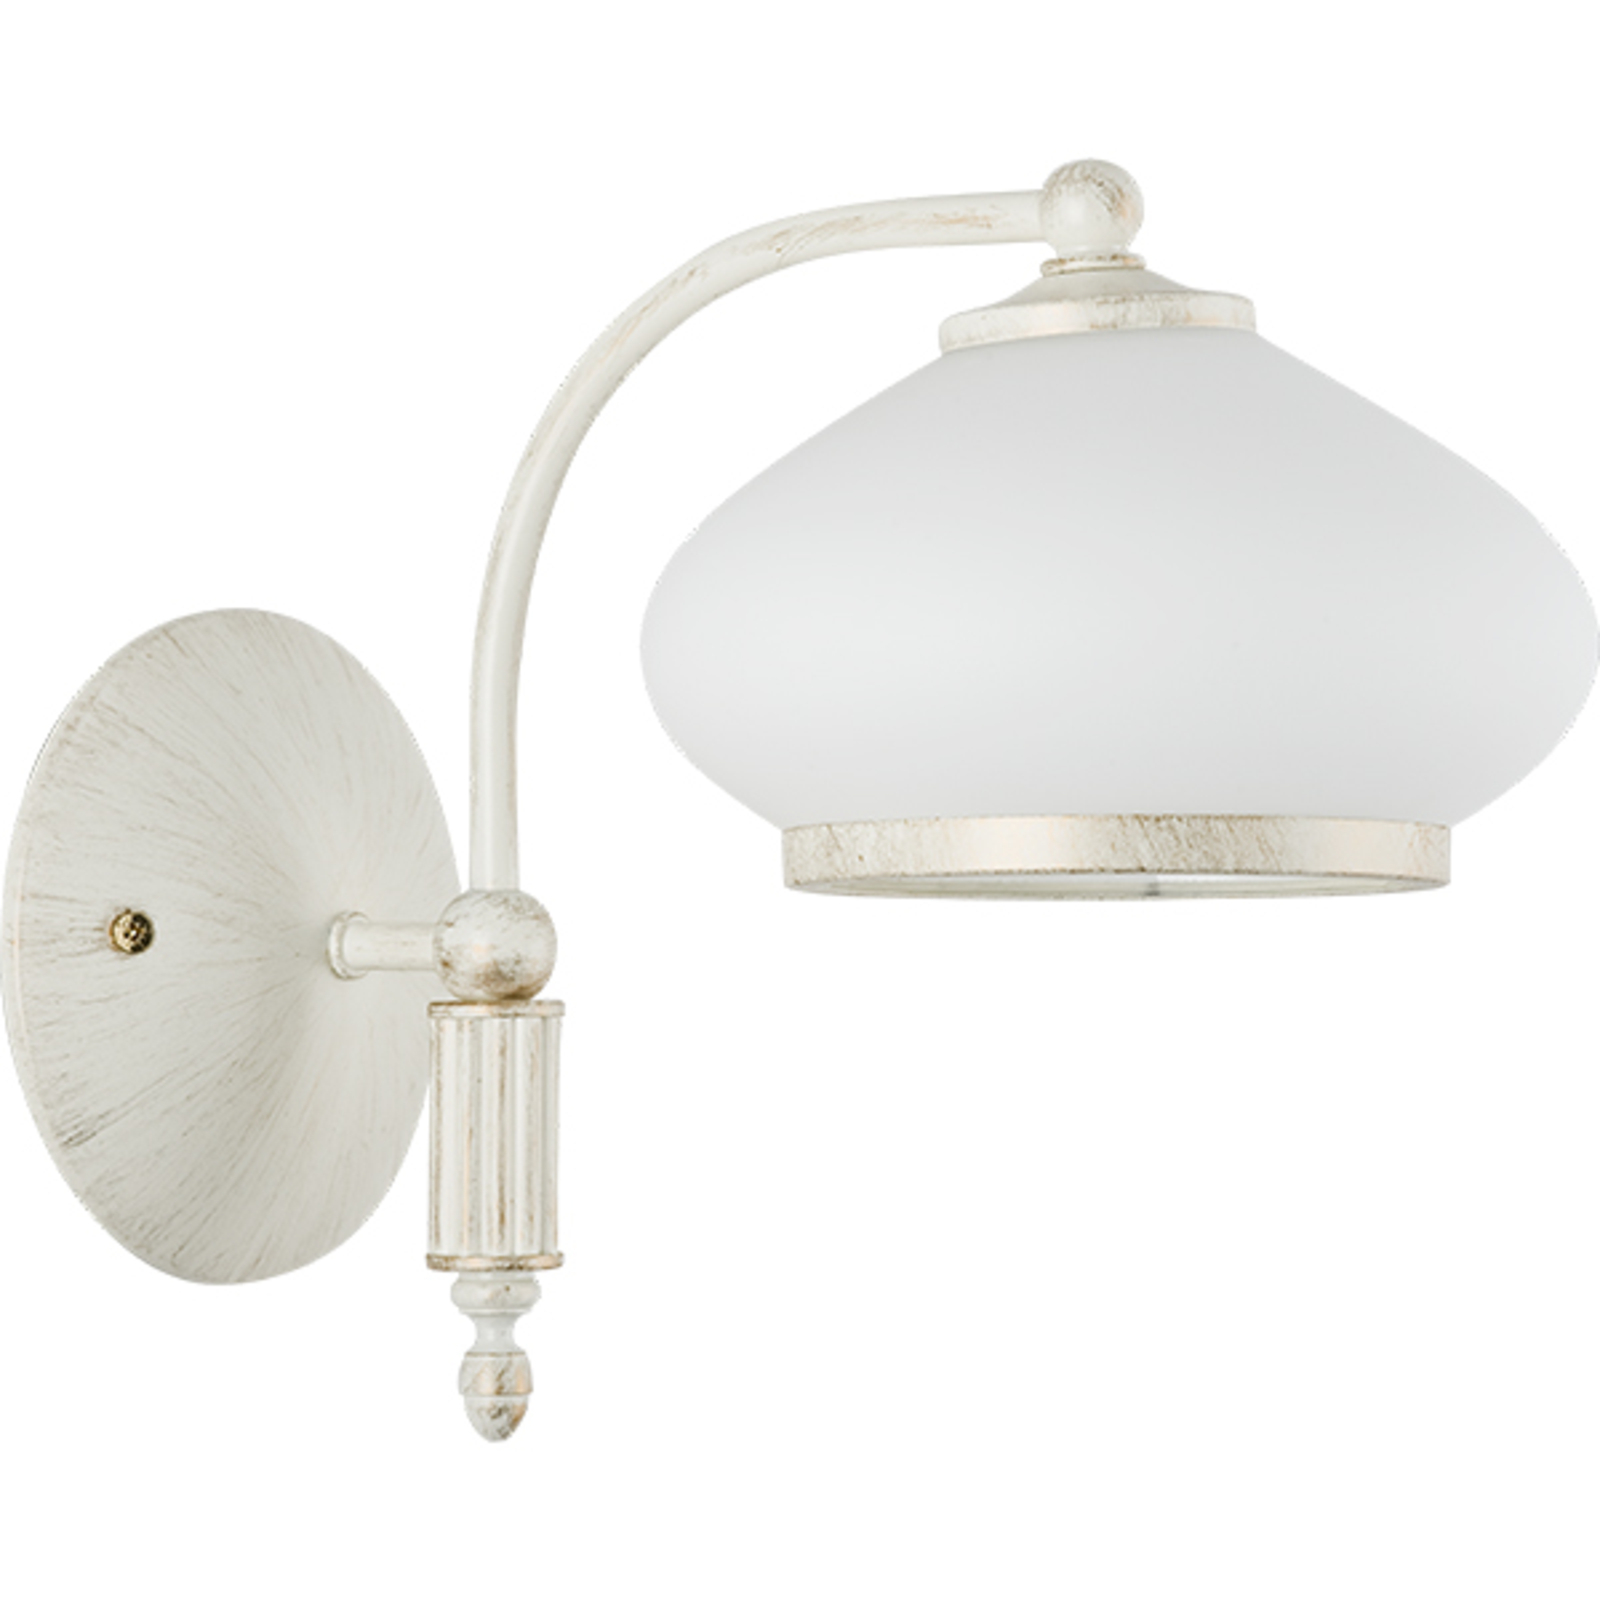 Astoria wall light with a glass lampshade, white